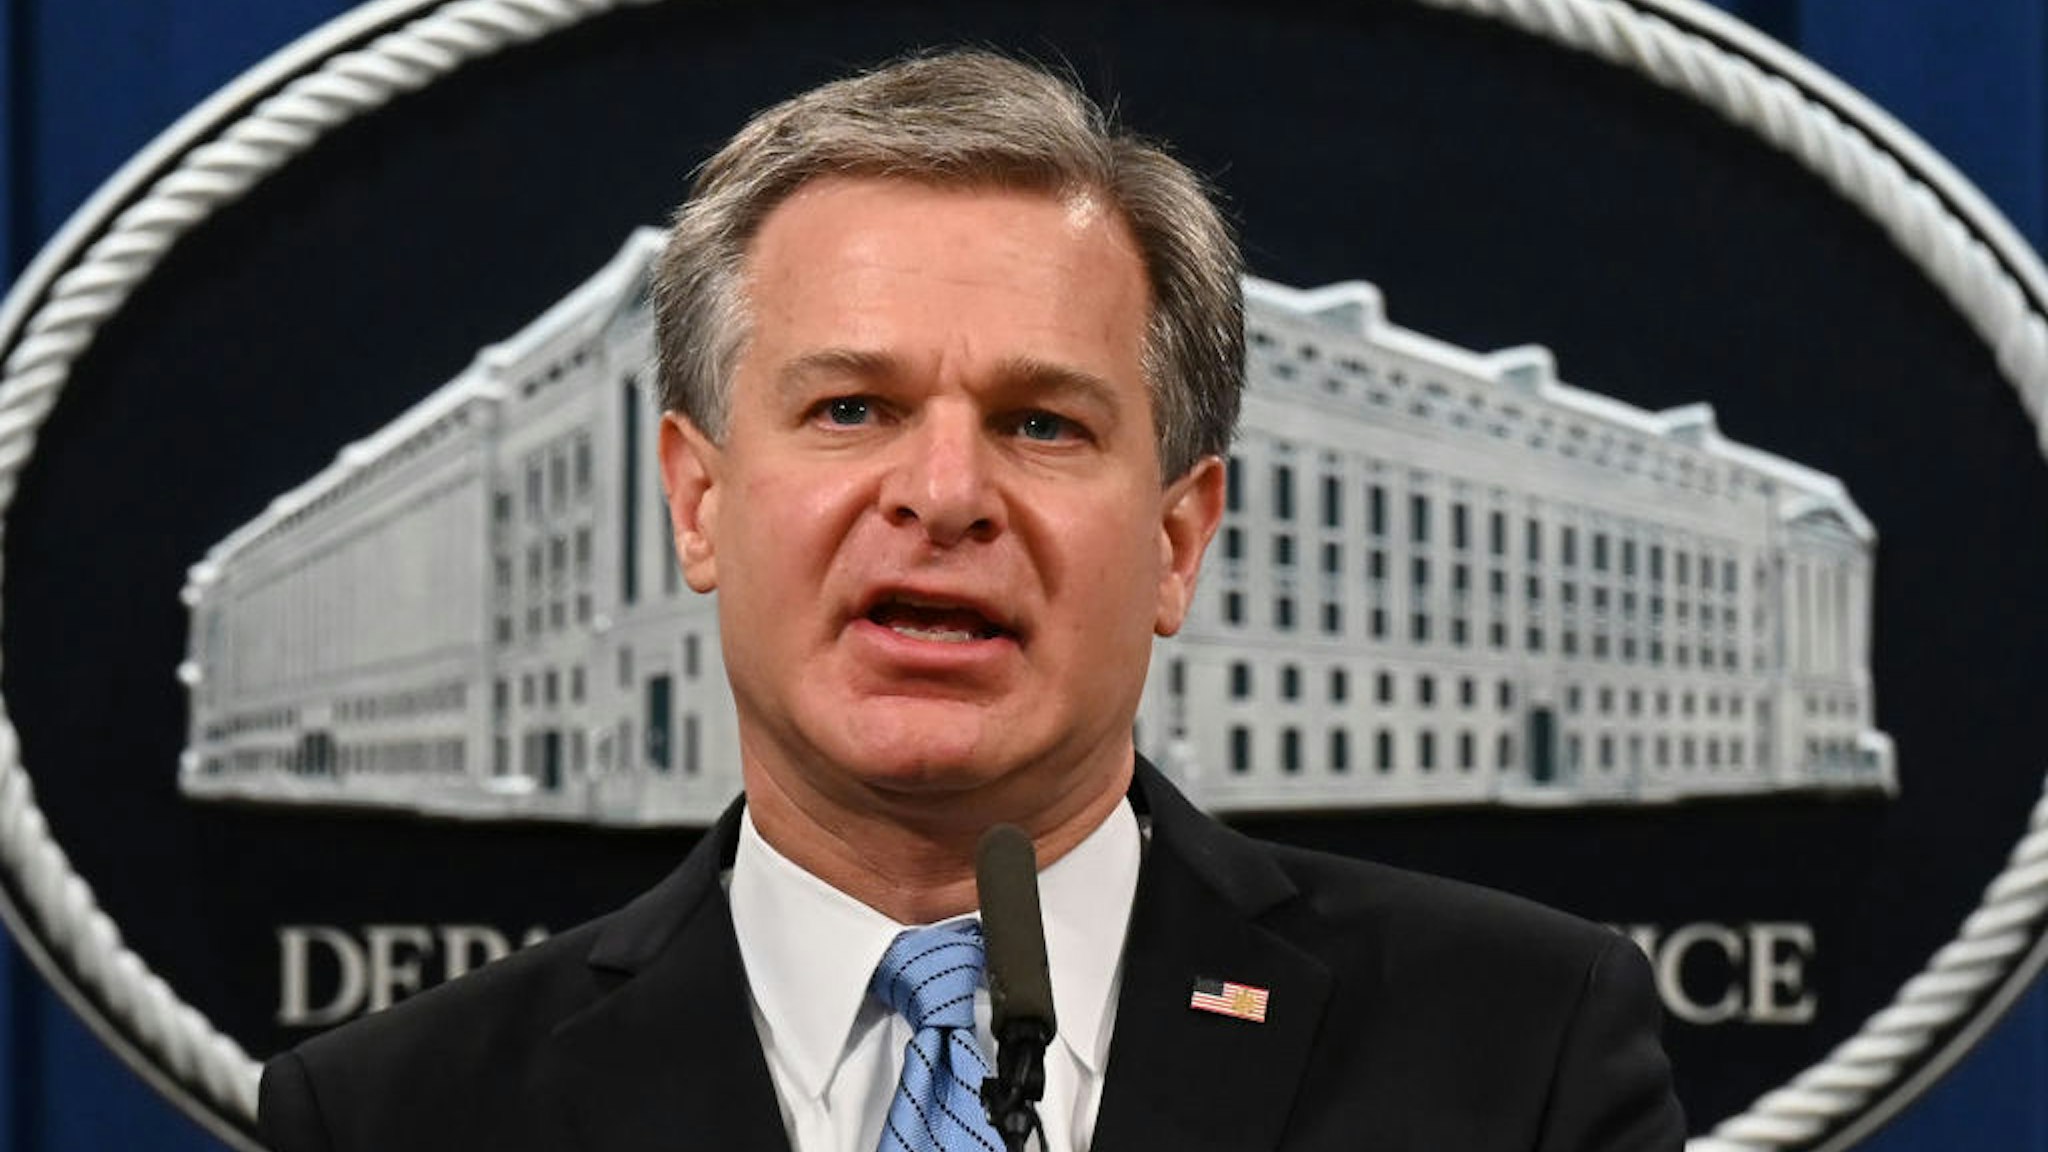 Christopher Wray, director of the Federal Bureau of Investigation (FBI), speaks during a news conference at the Department of Justice in Washington, D.C., U.S., on Wednesday, Oct. 7, 2020. U.S. authorities announced two Islamic State militants, tied to beheadings and other acts of violence against Western hostages including four Americans, will face trial in federal court in the Eastern District of Virginia. Photographer: Jim Watson/AFP/Bloomberg